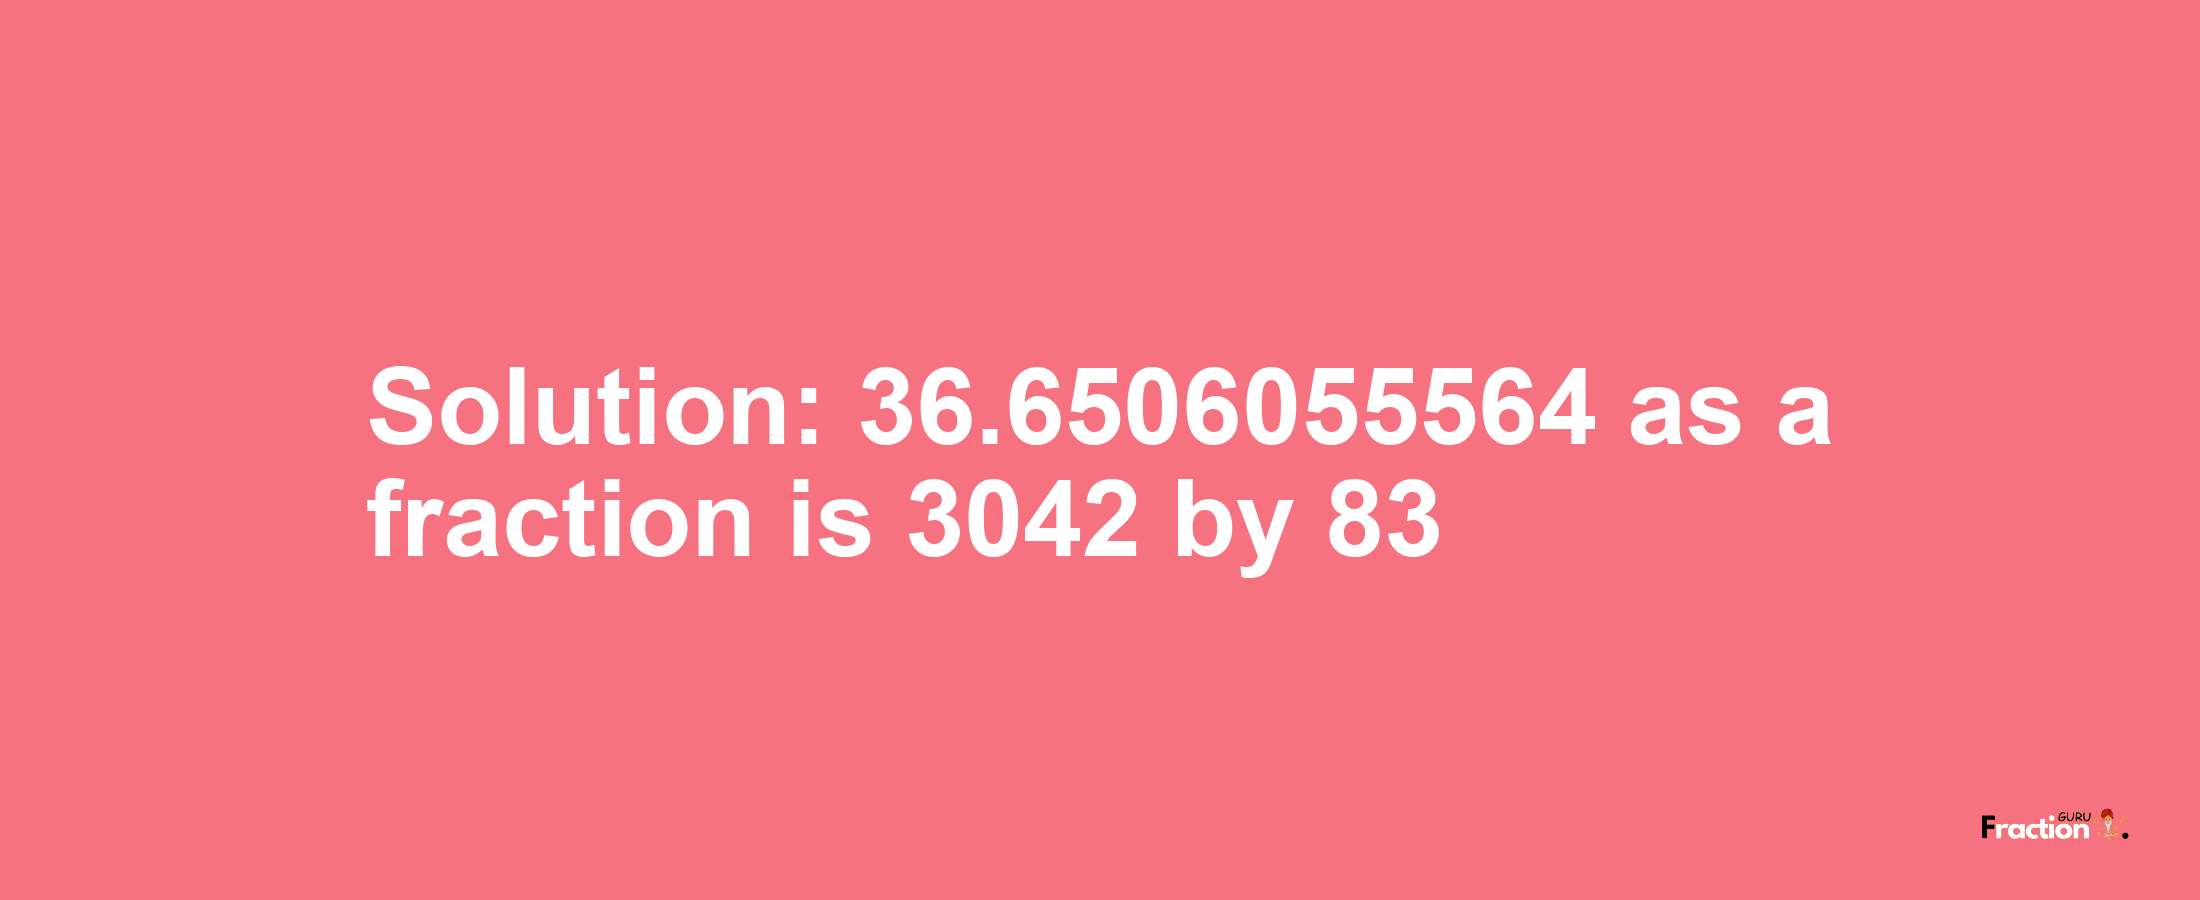 Solution:36.6506055564 as a fraction is 3042/83